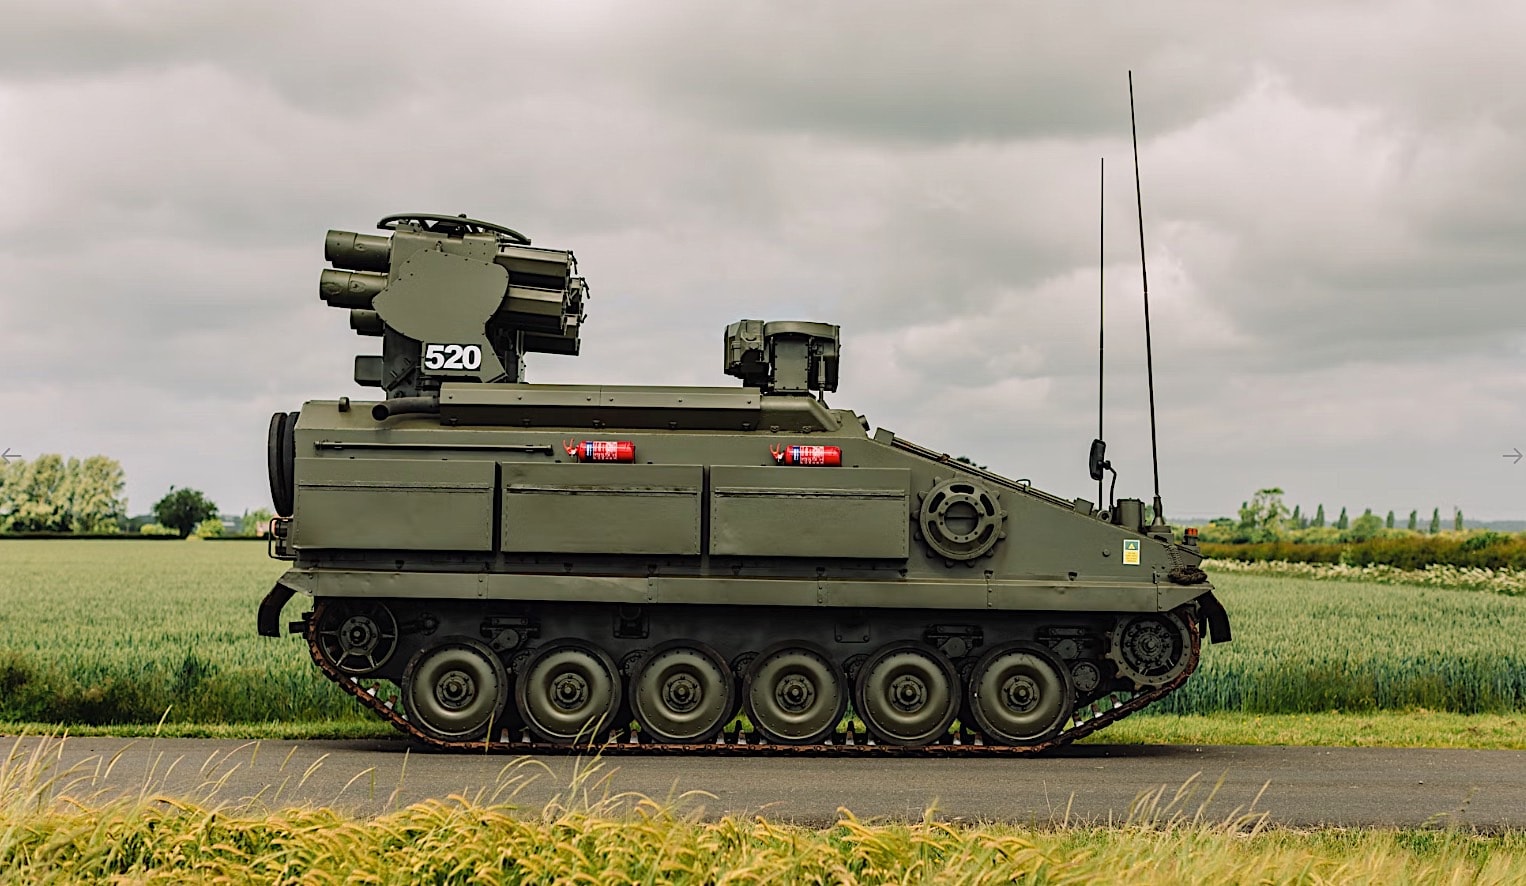 Road Legal Anti-Aircraft Missile Launcher Is the Thing to Own This